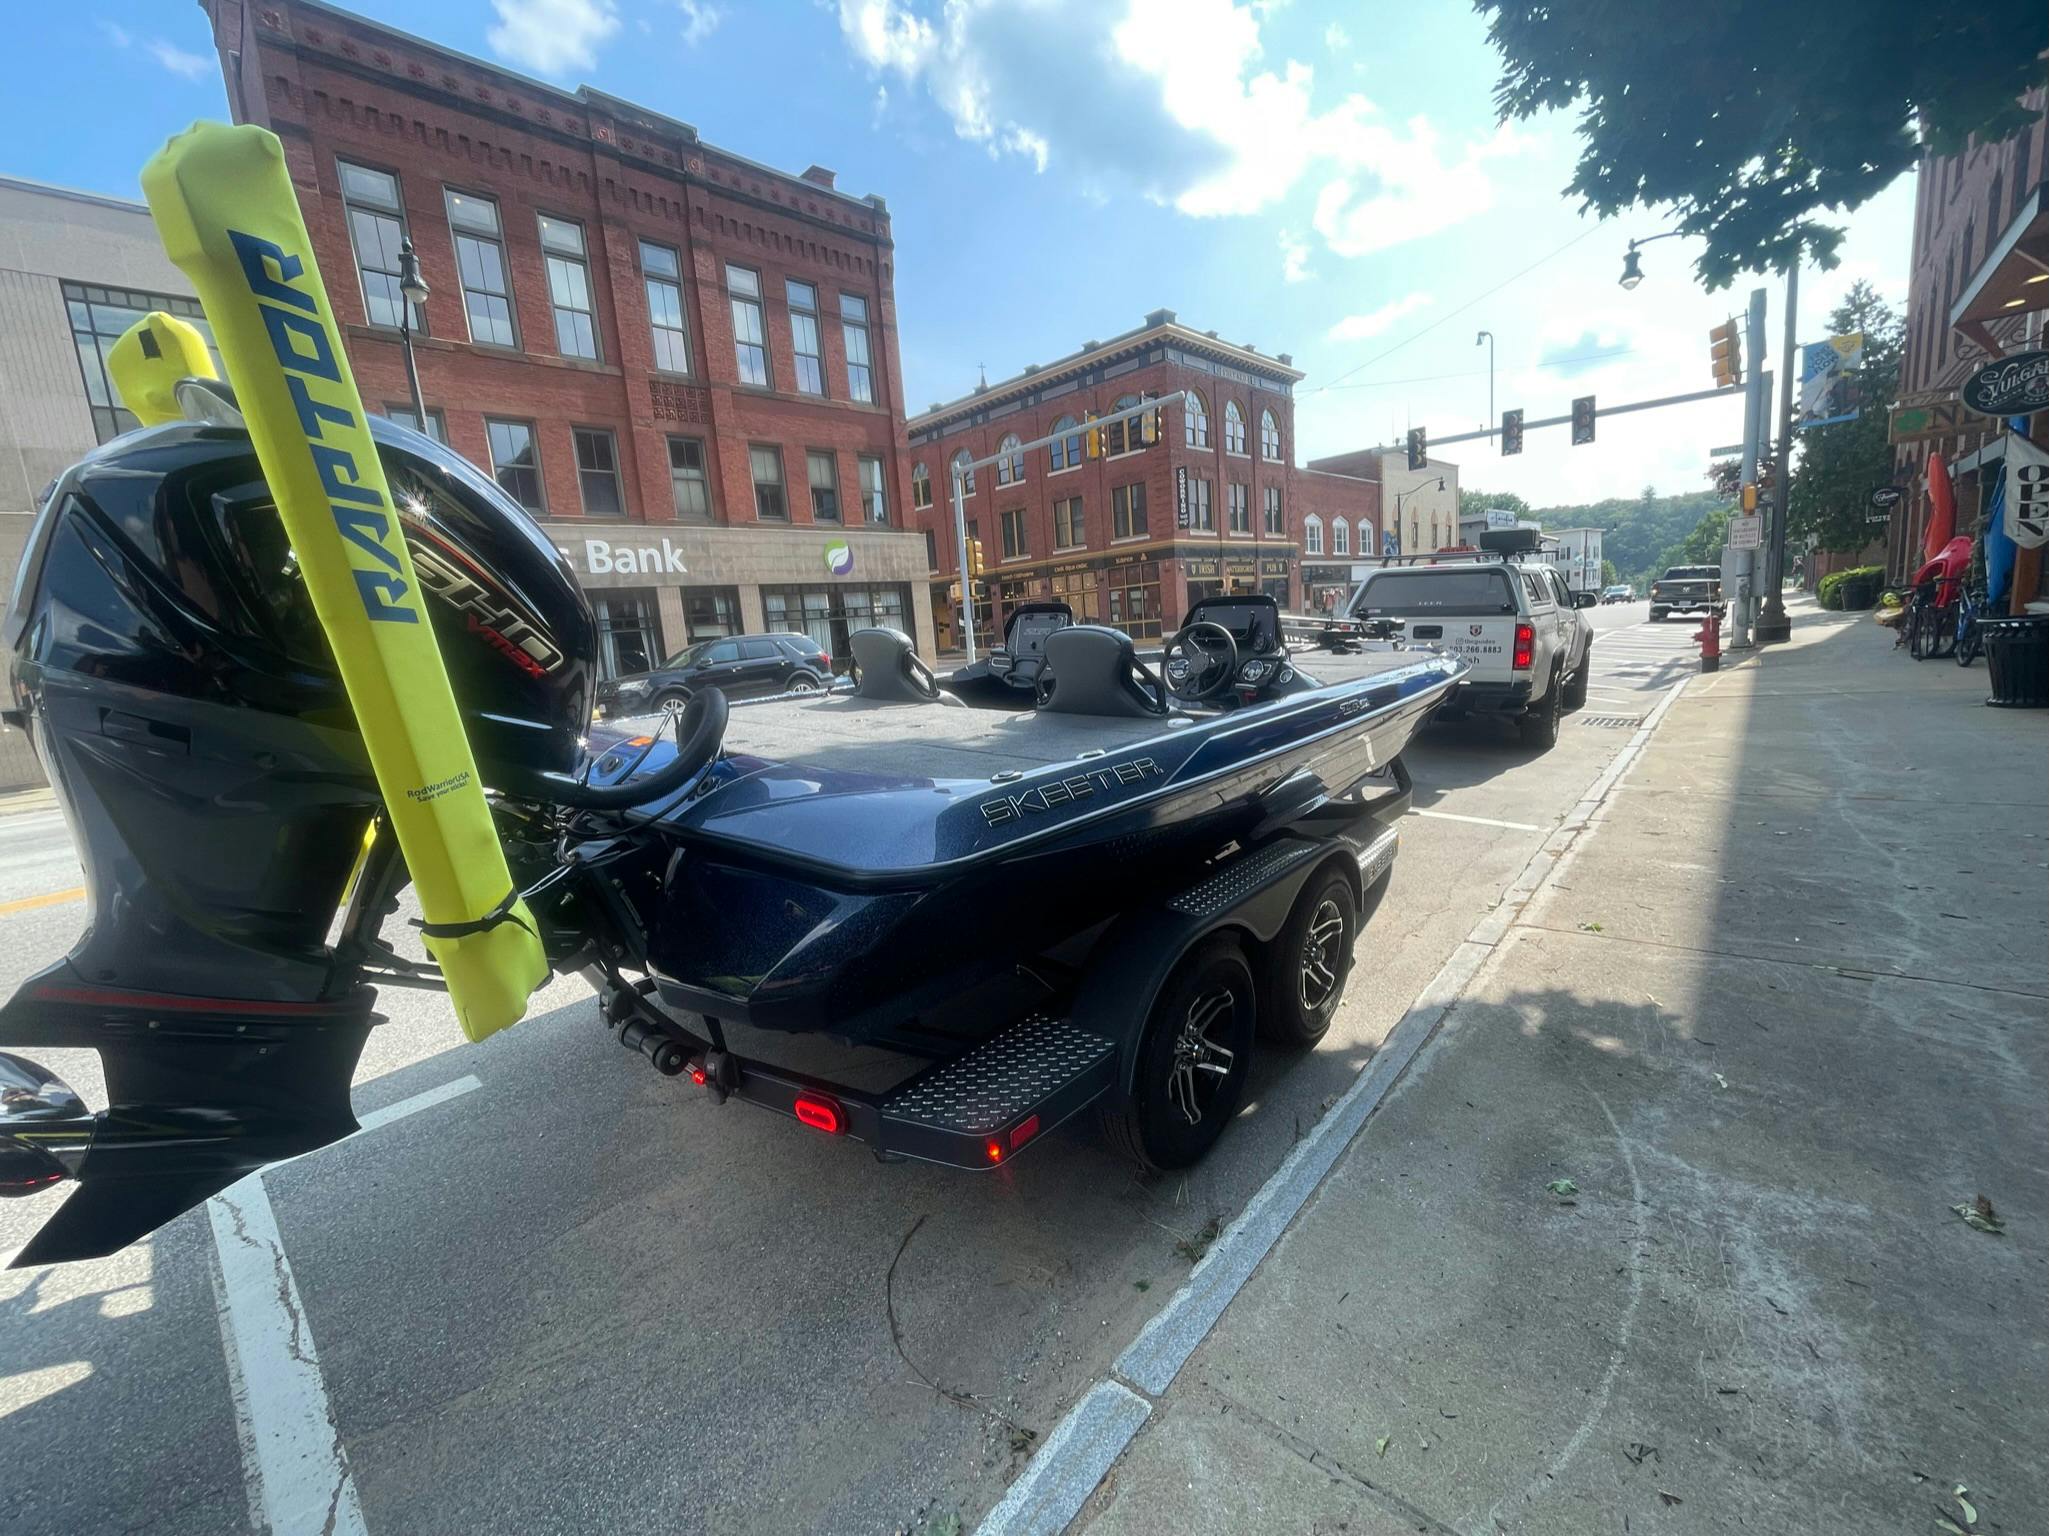 blue boat sitting in city parking space while hitched to white truck